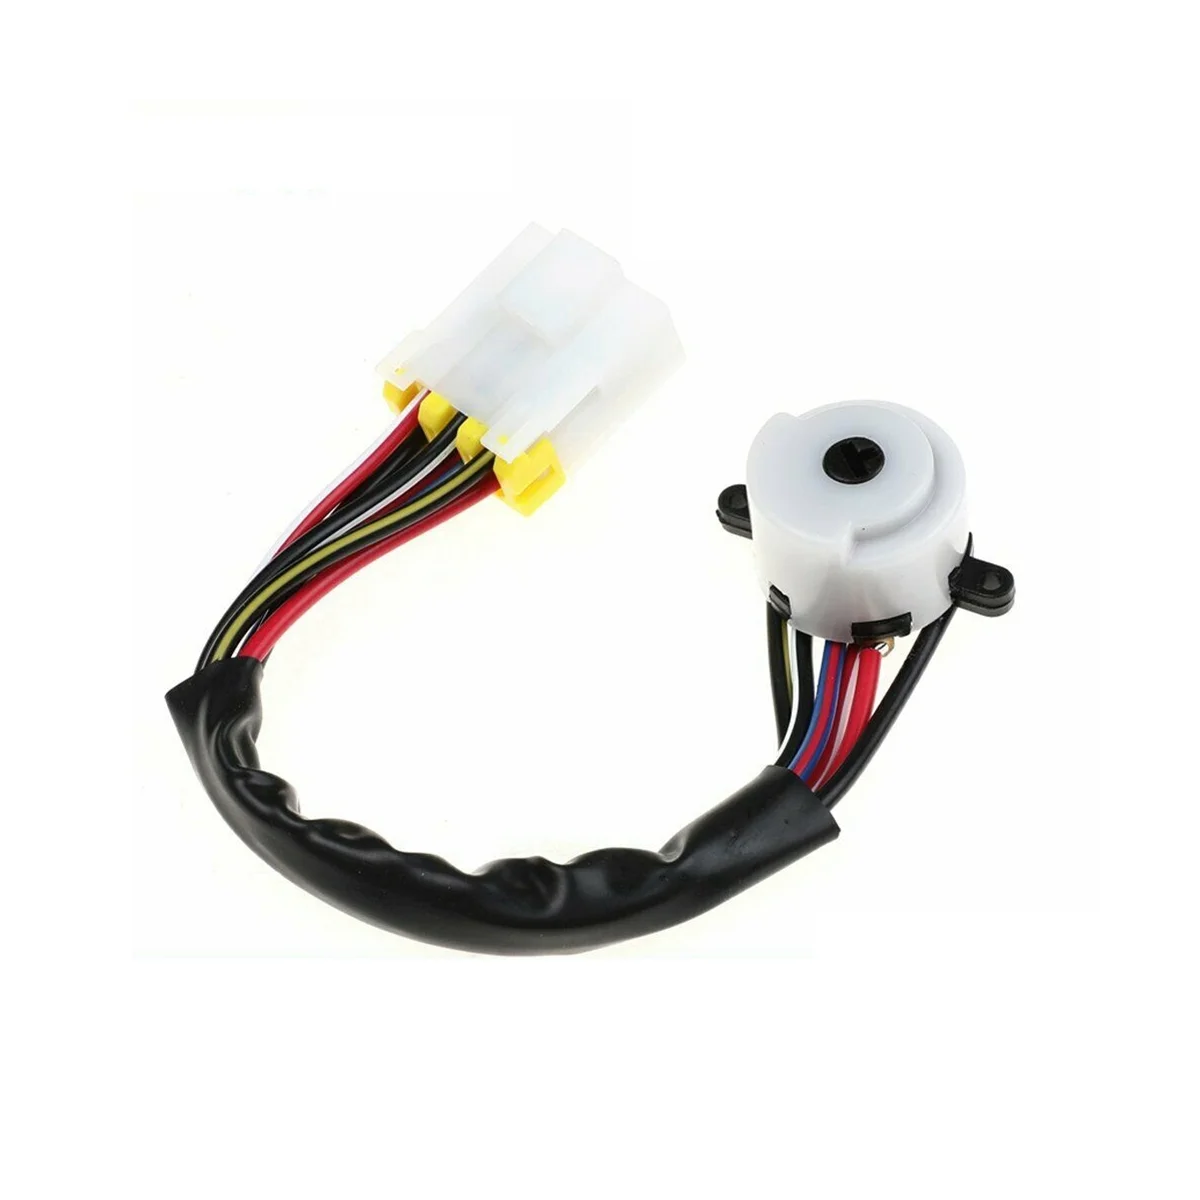 

48750-1E411 Ignition Switch Wire Switch Cable for Nissan Altima Maxima Pathfinder 200SX